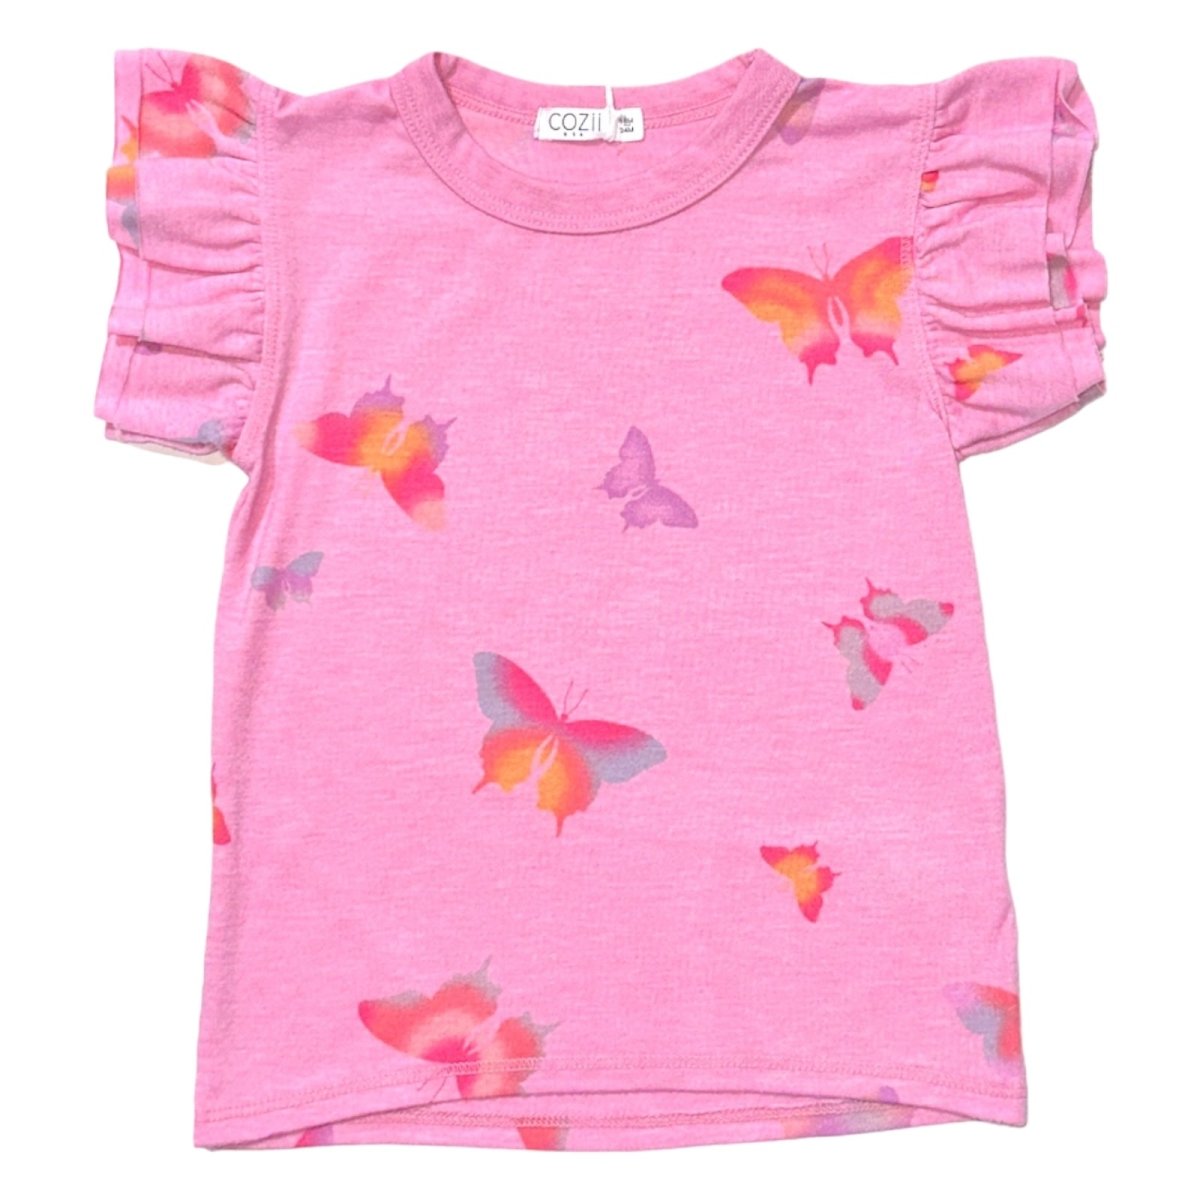 BUTTERFLY TSHIRT - COZII BY T2LOVE